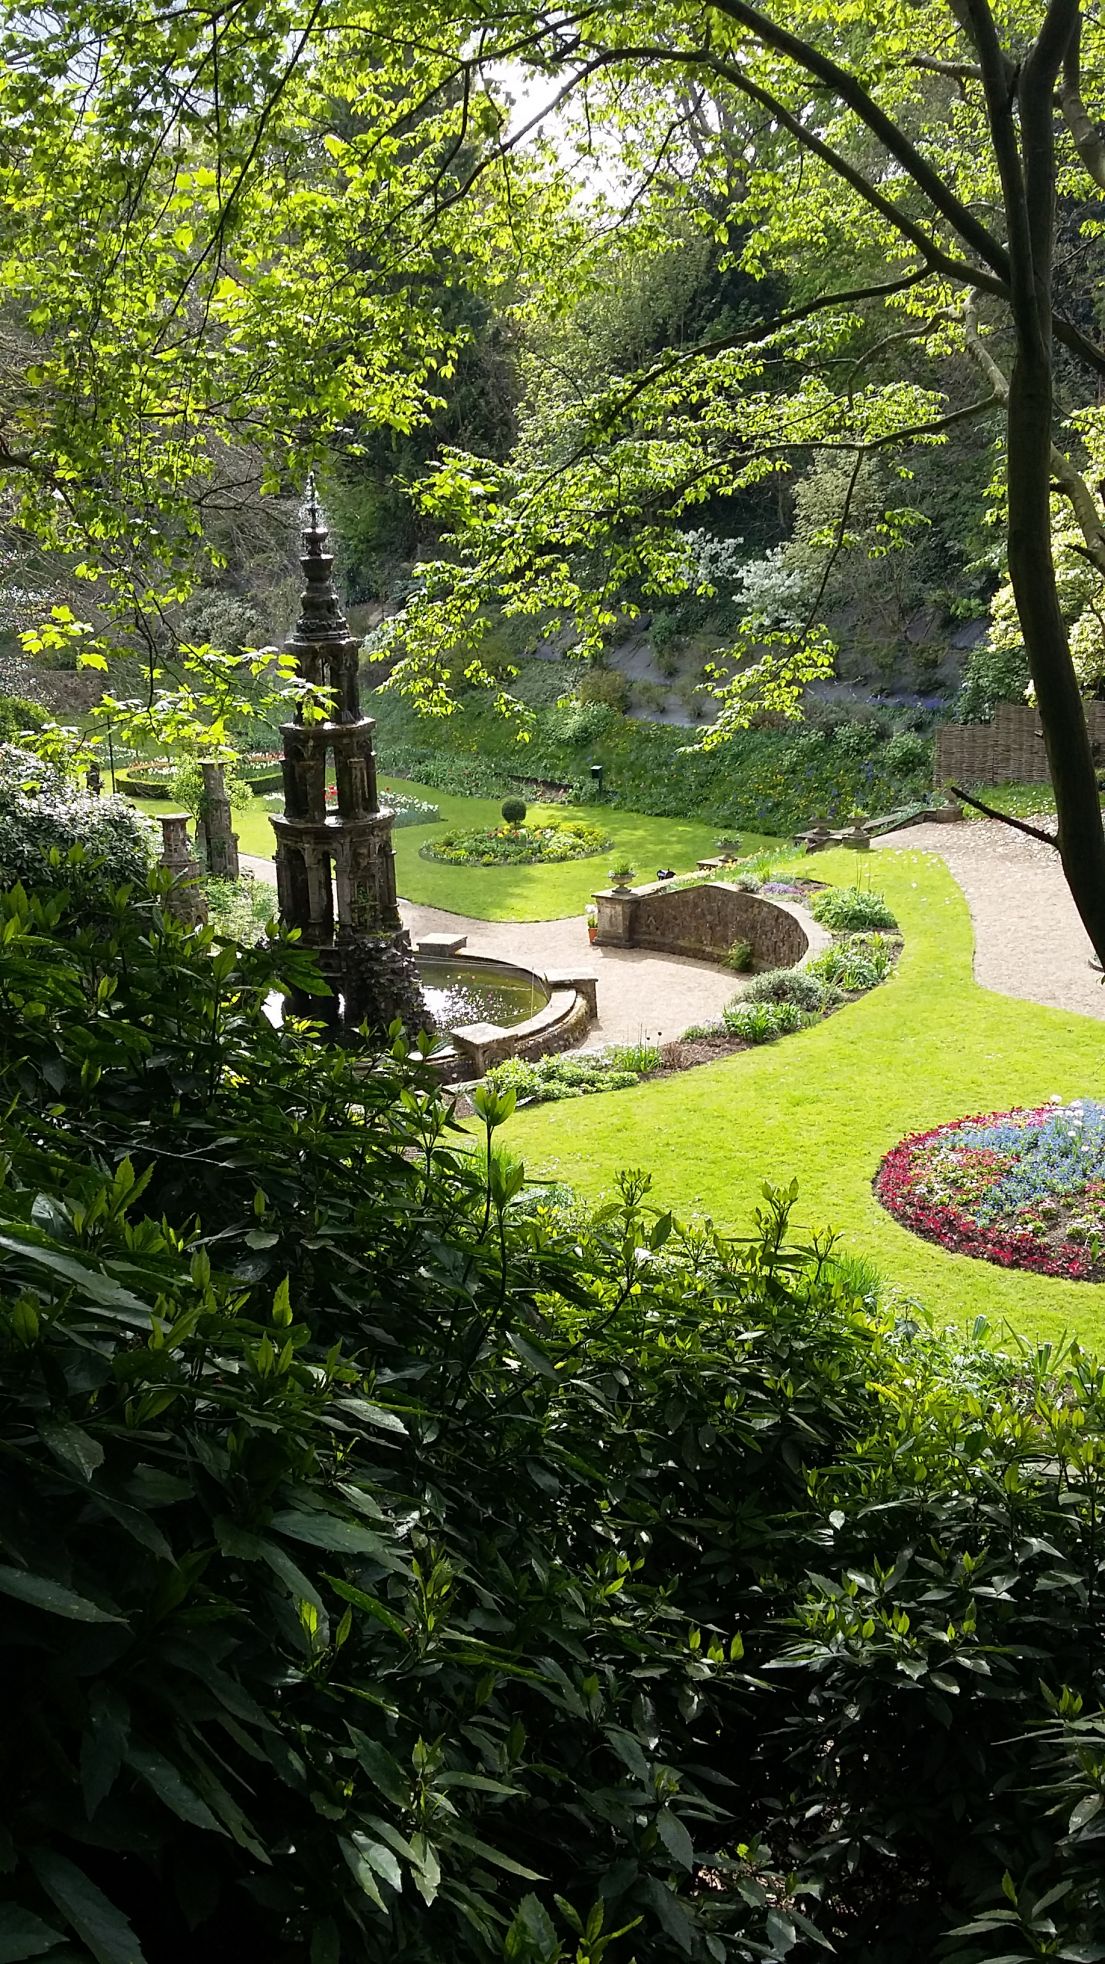 Looking down into a carefully designed garden with a tall fountain, circular flower beds and gravel paths.